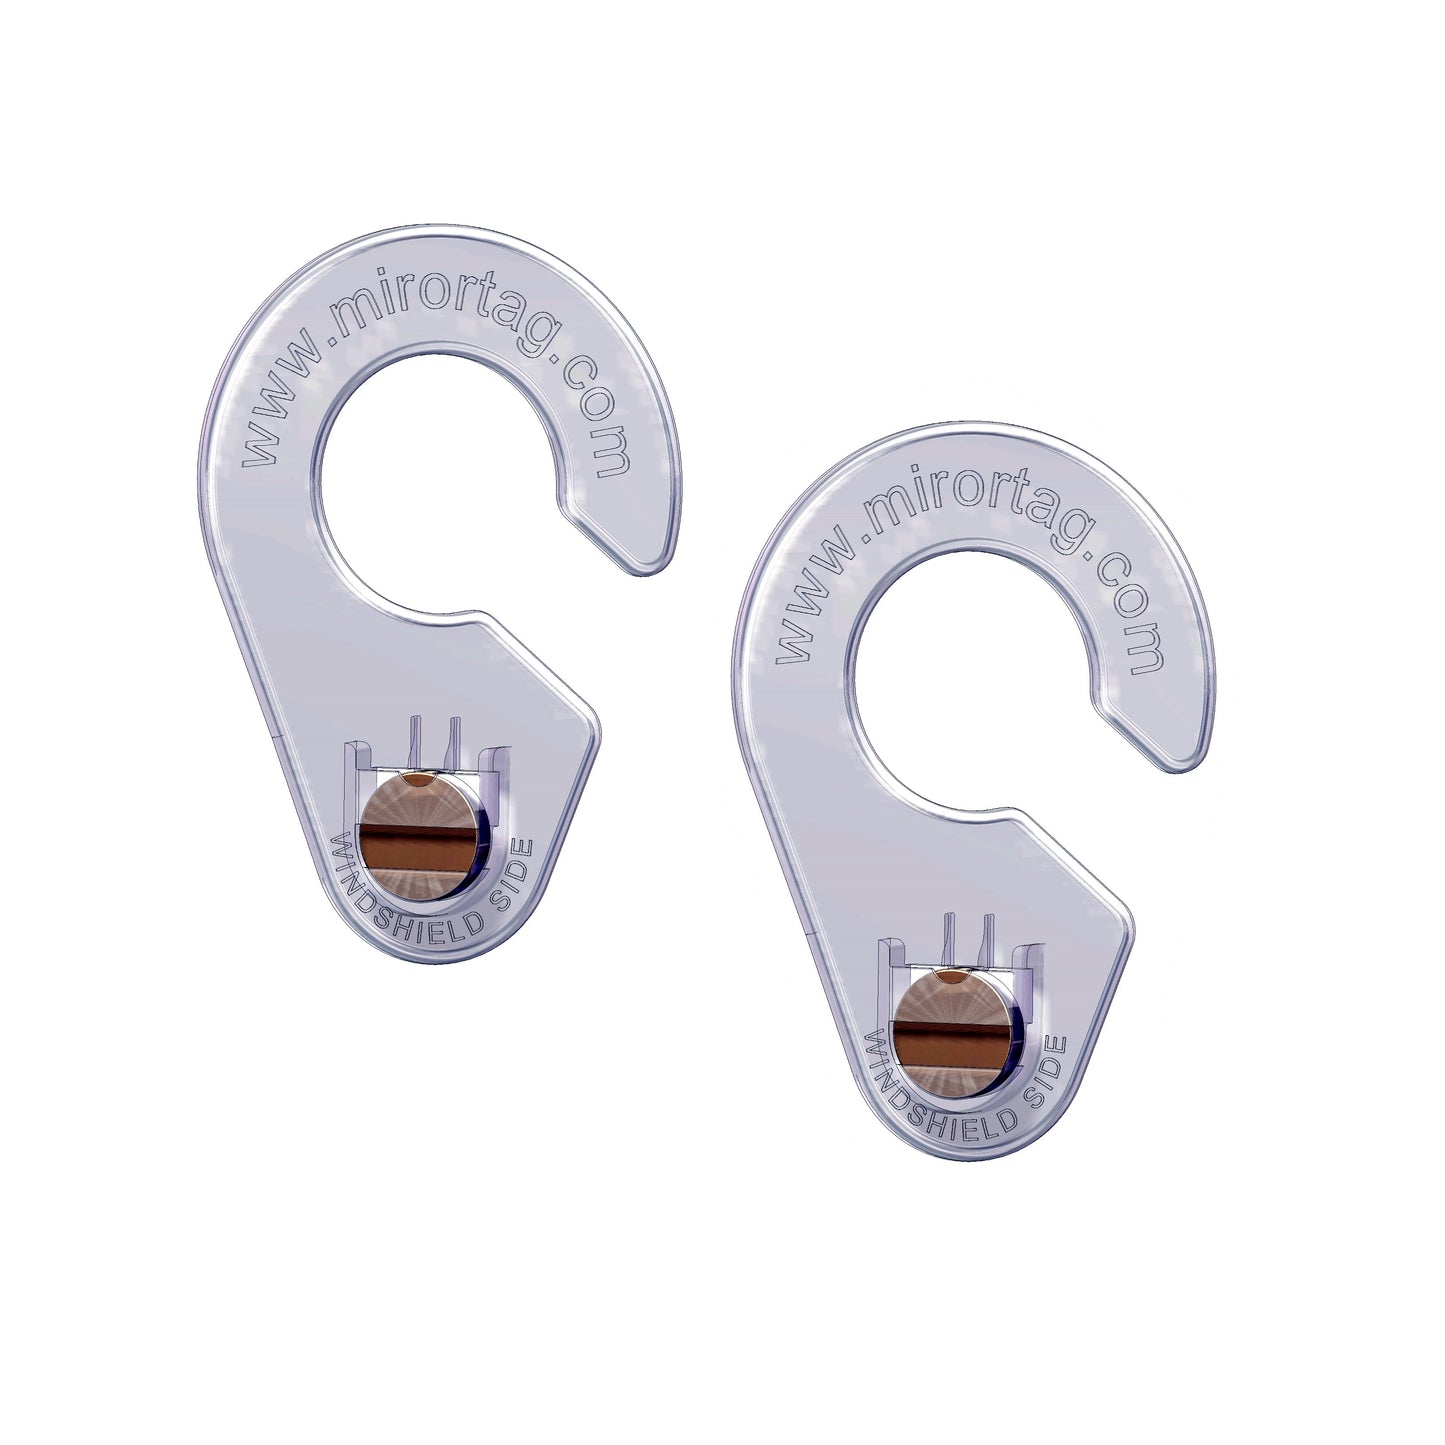 Magnetic hooks for mirortag holders for handicap placard protector